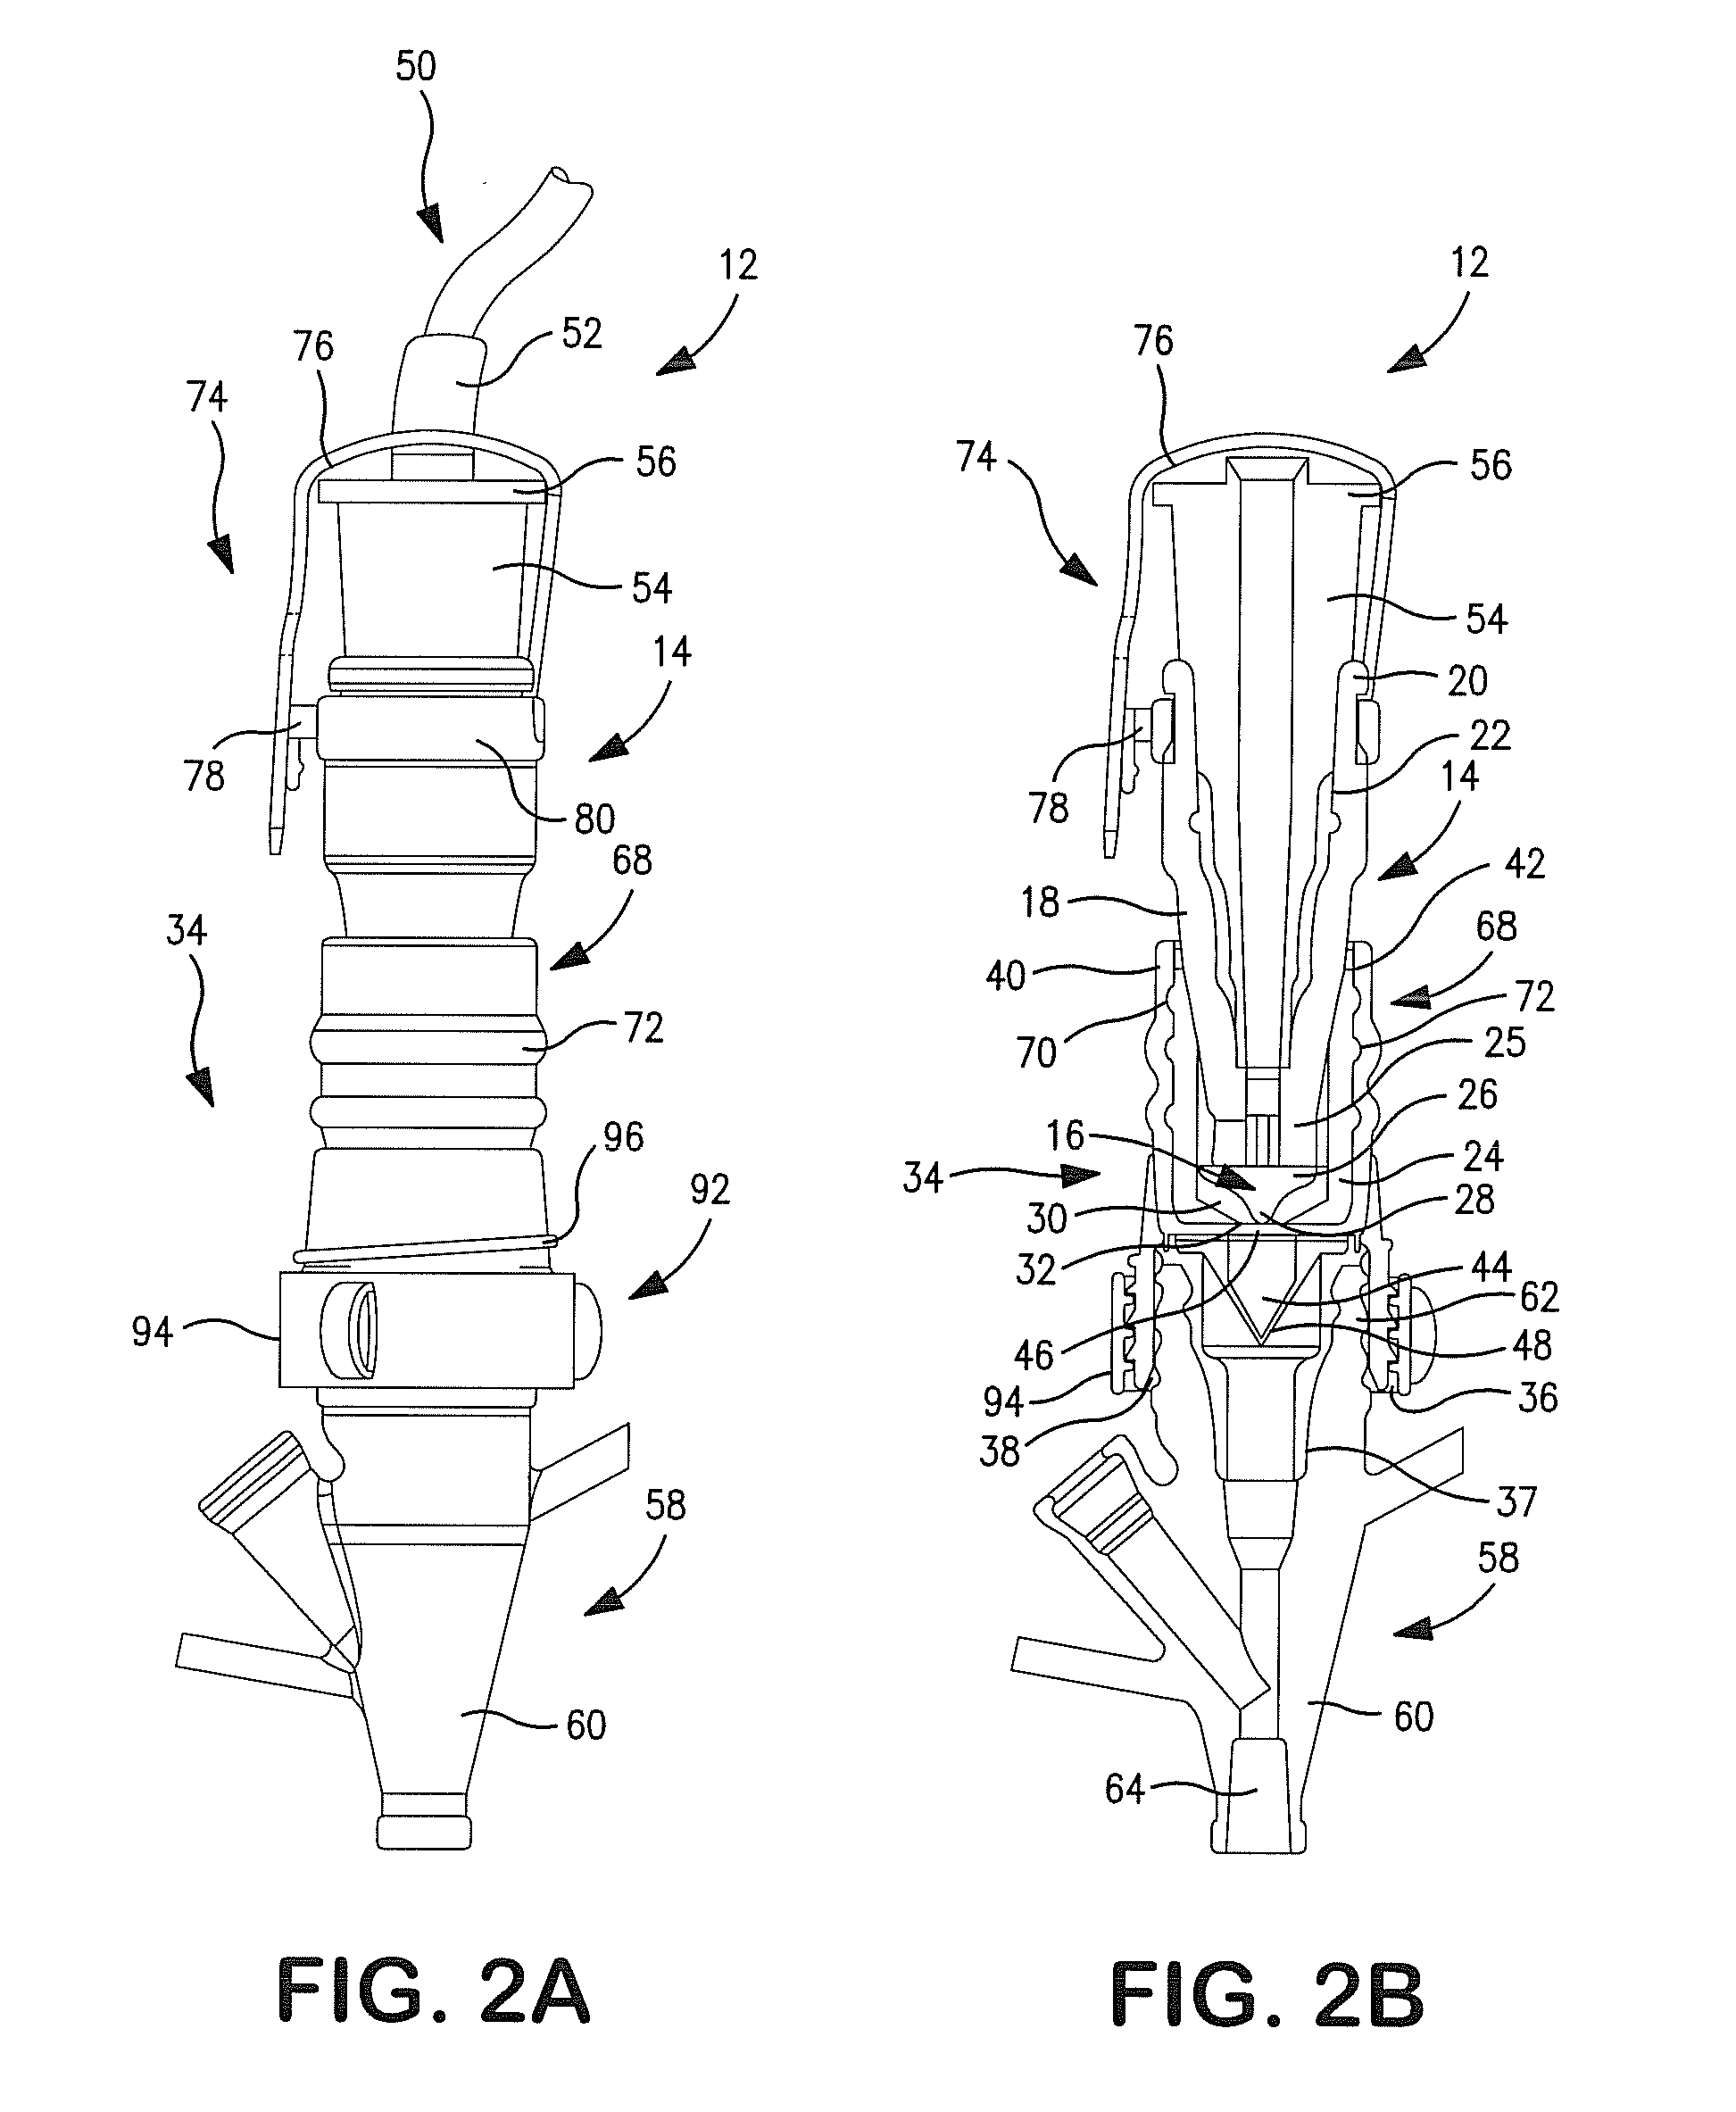 Automatic Shut-Off Connector for Enteral Feeding Devices